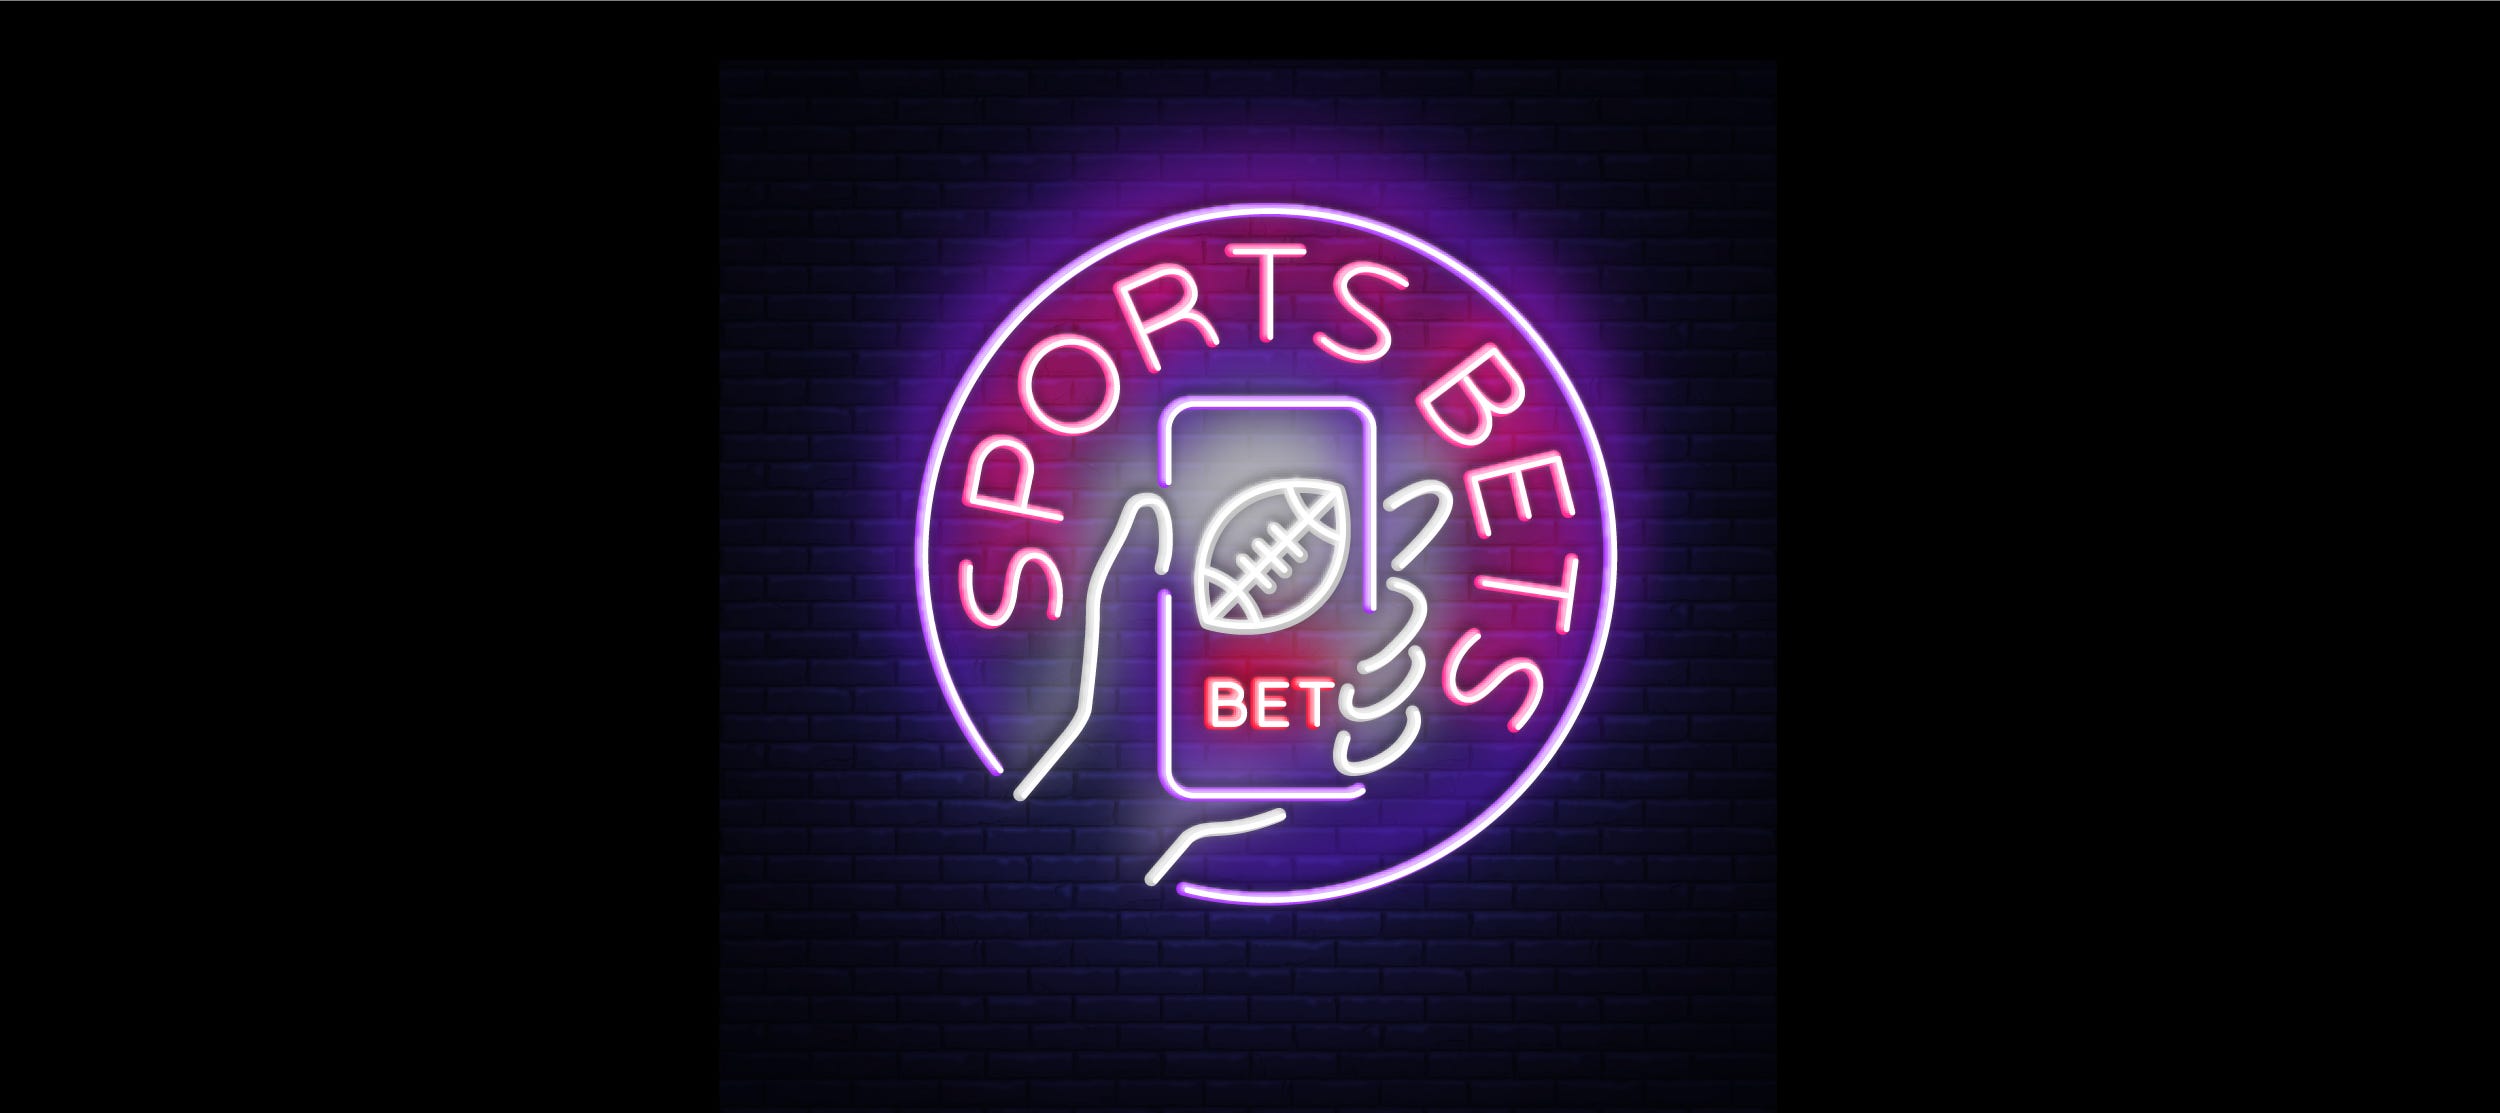 </p>
<p>Sports Betting : Everything You Need to Get Started</p>
<p>“/><span style=